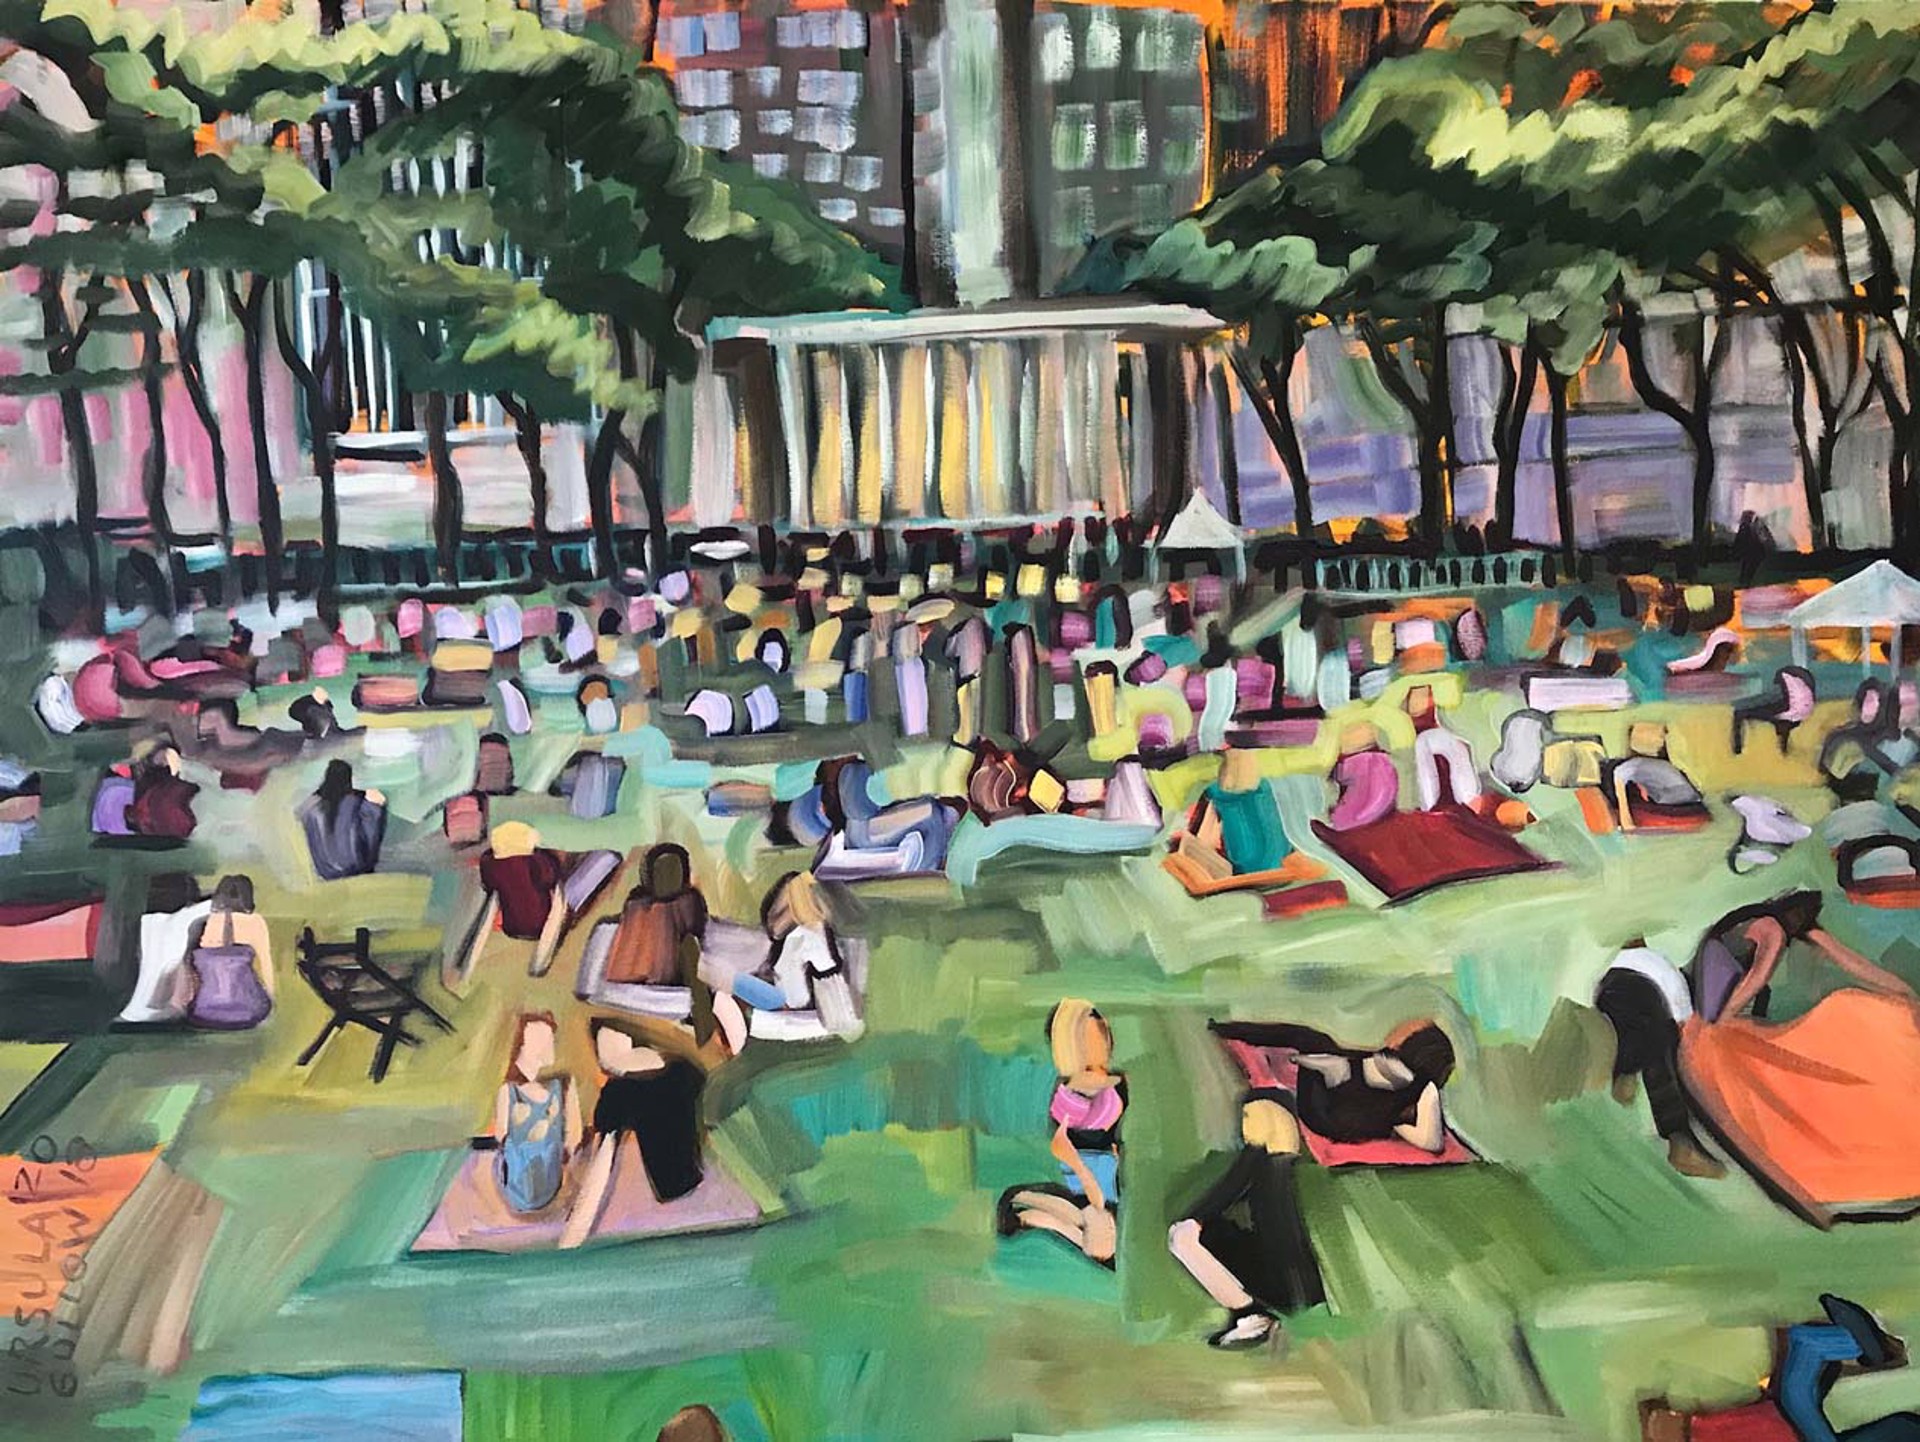 Picnicking In The Park by Ursula Gullow